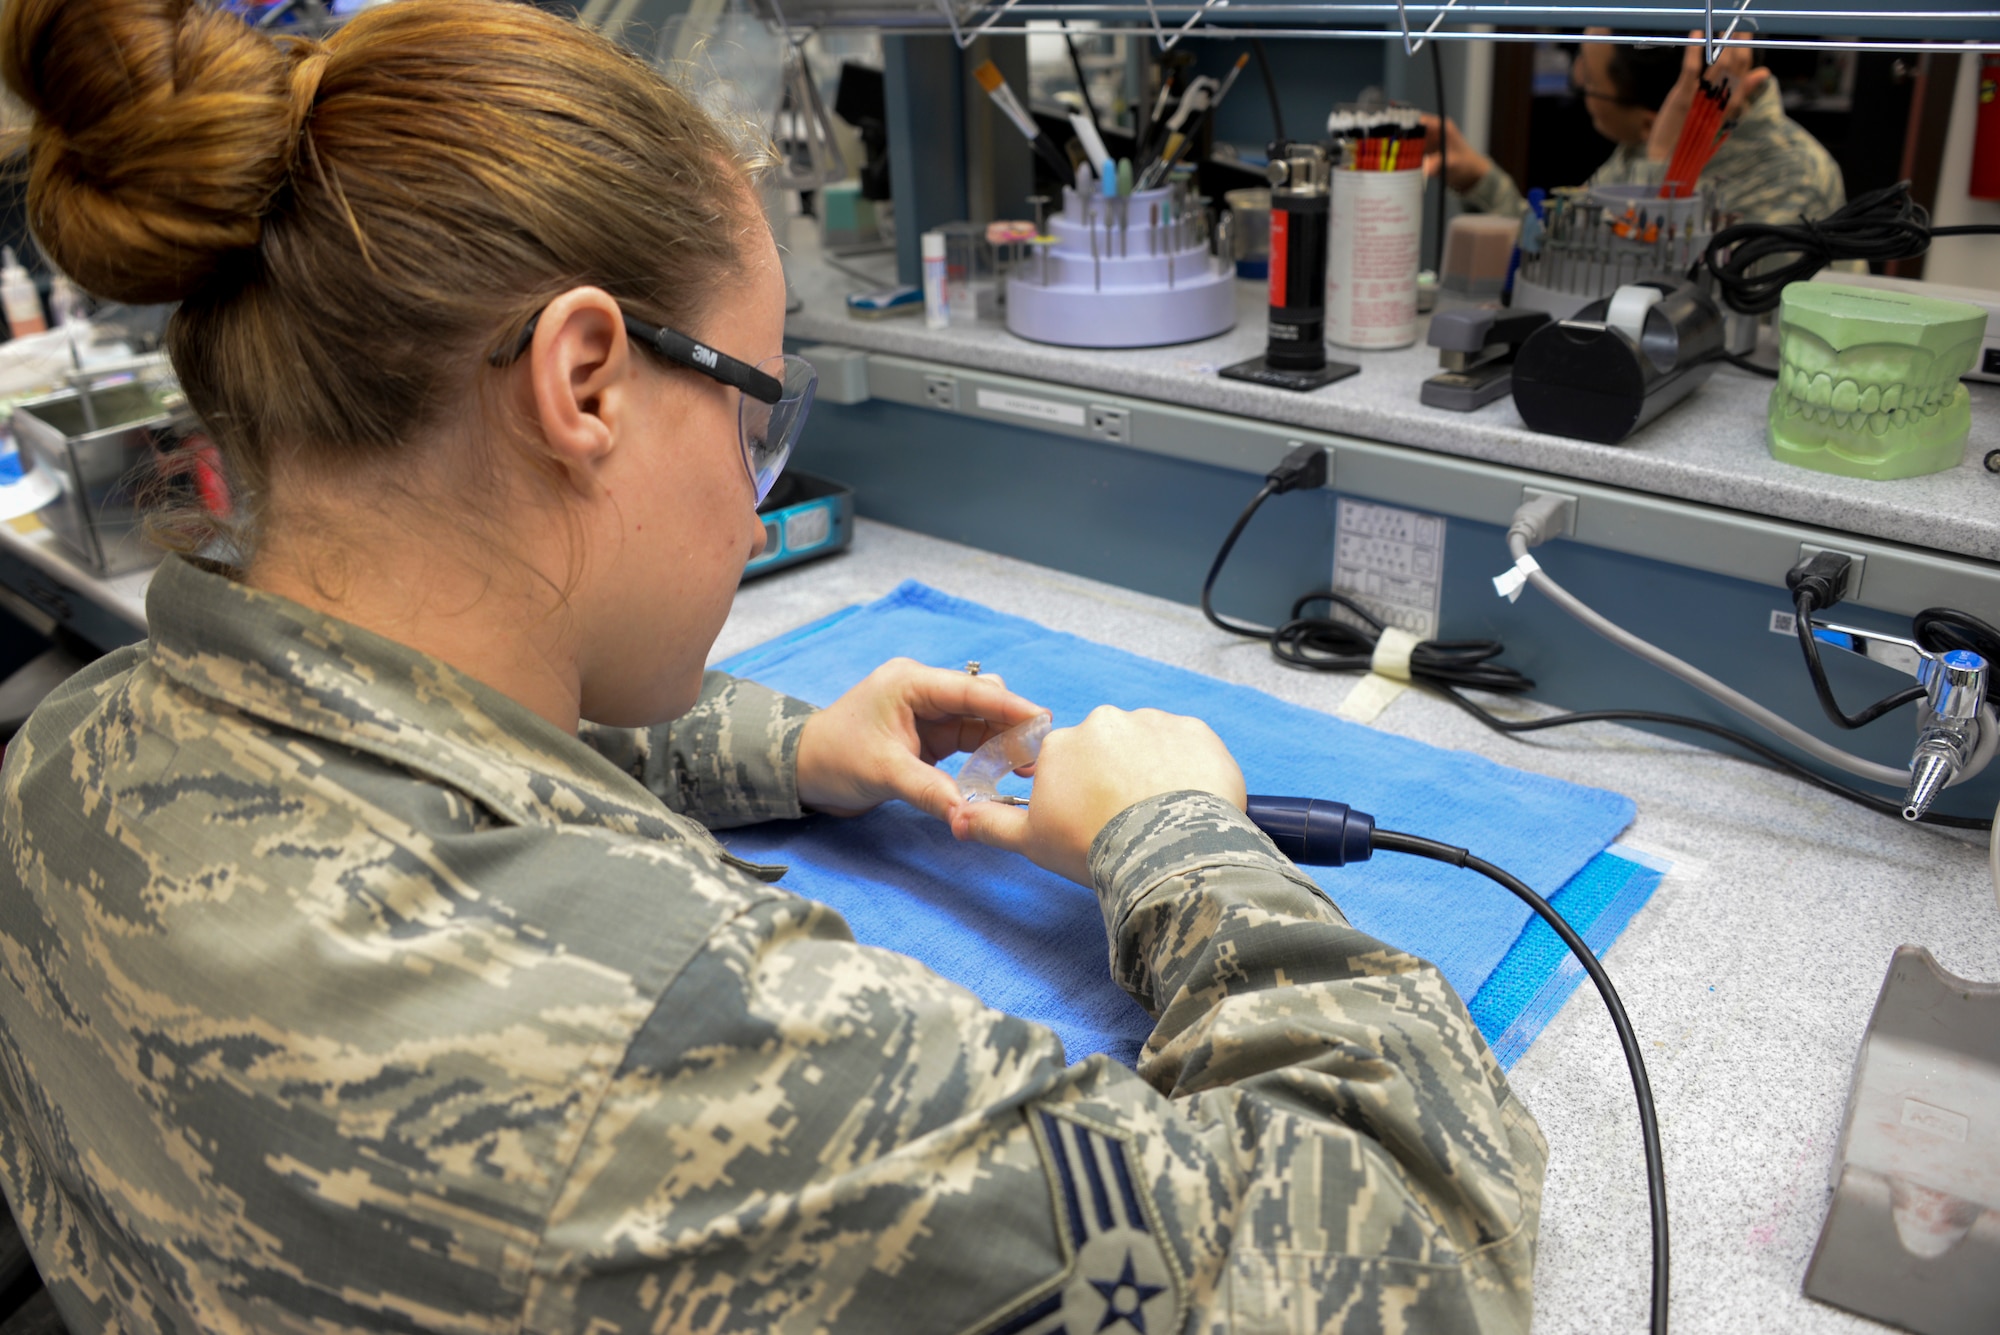 Senior Airman Mackenzie Vitale, 60th DS dental lab technician, performs a surgical guide for implants May 2 at Travis Air Force Base, California. If molds or crowns are needed, dental lab technicians perform a variety of molding work for dental appliances. (U.S. Air Force photo by Senior Airman Amber Carter)